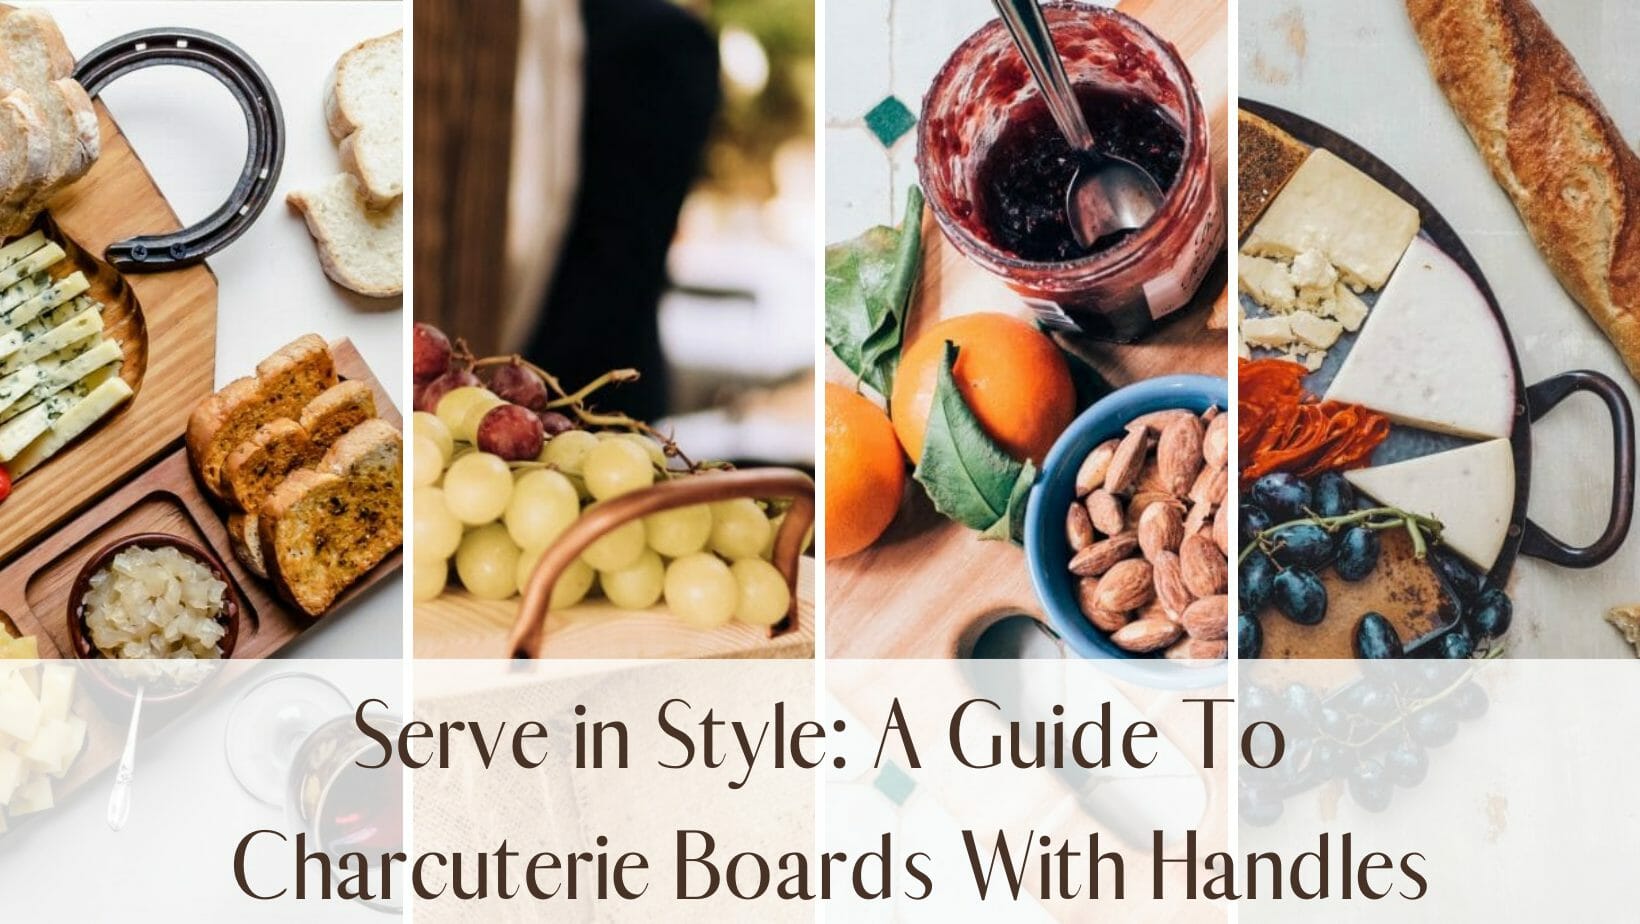 https://charcuterieassociation.com/wp-content/uploads/2023/04/Charcuterie-Boards-With-Handles.jpg